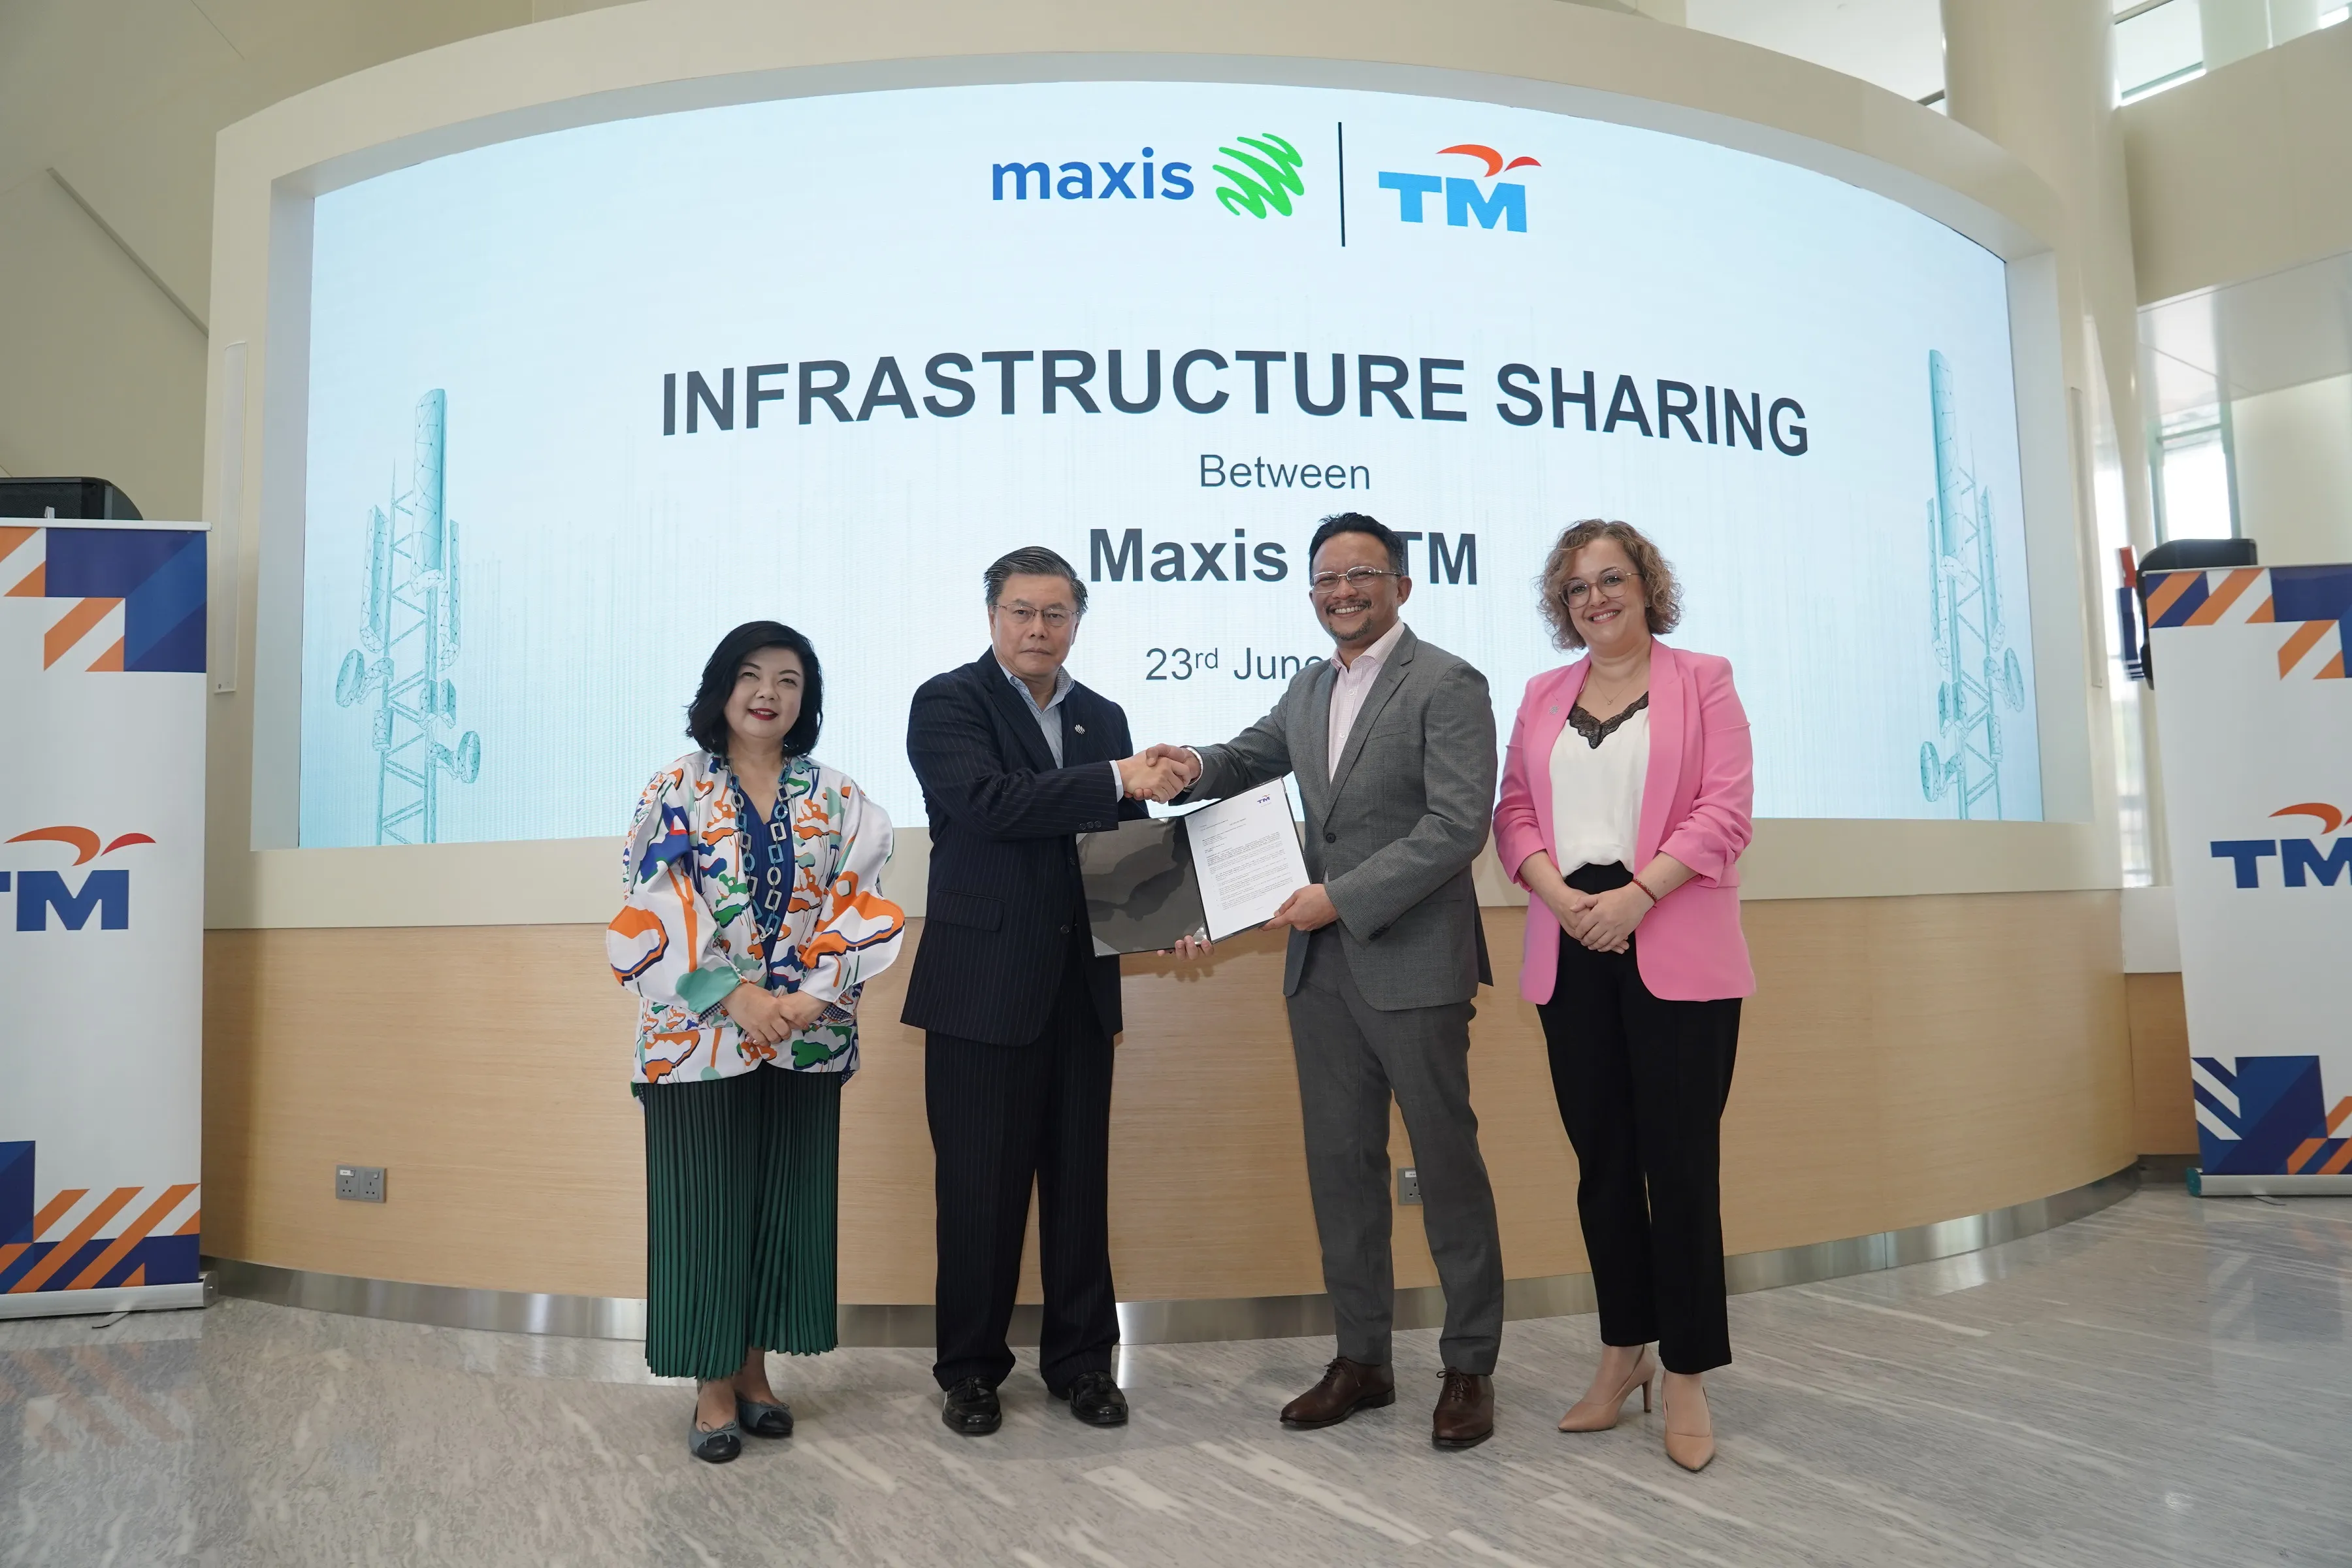 TM leverages Maxis’ infrastructure to drive enhanced mobile connectivity nationwide